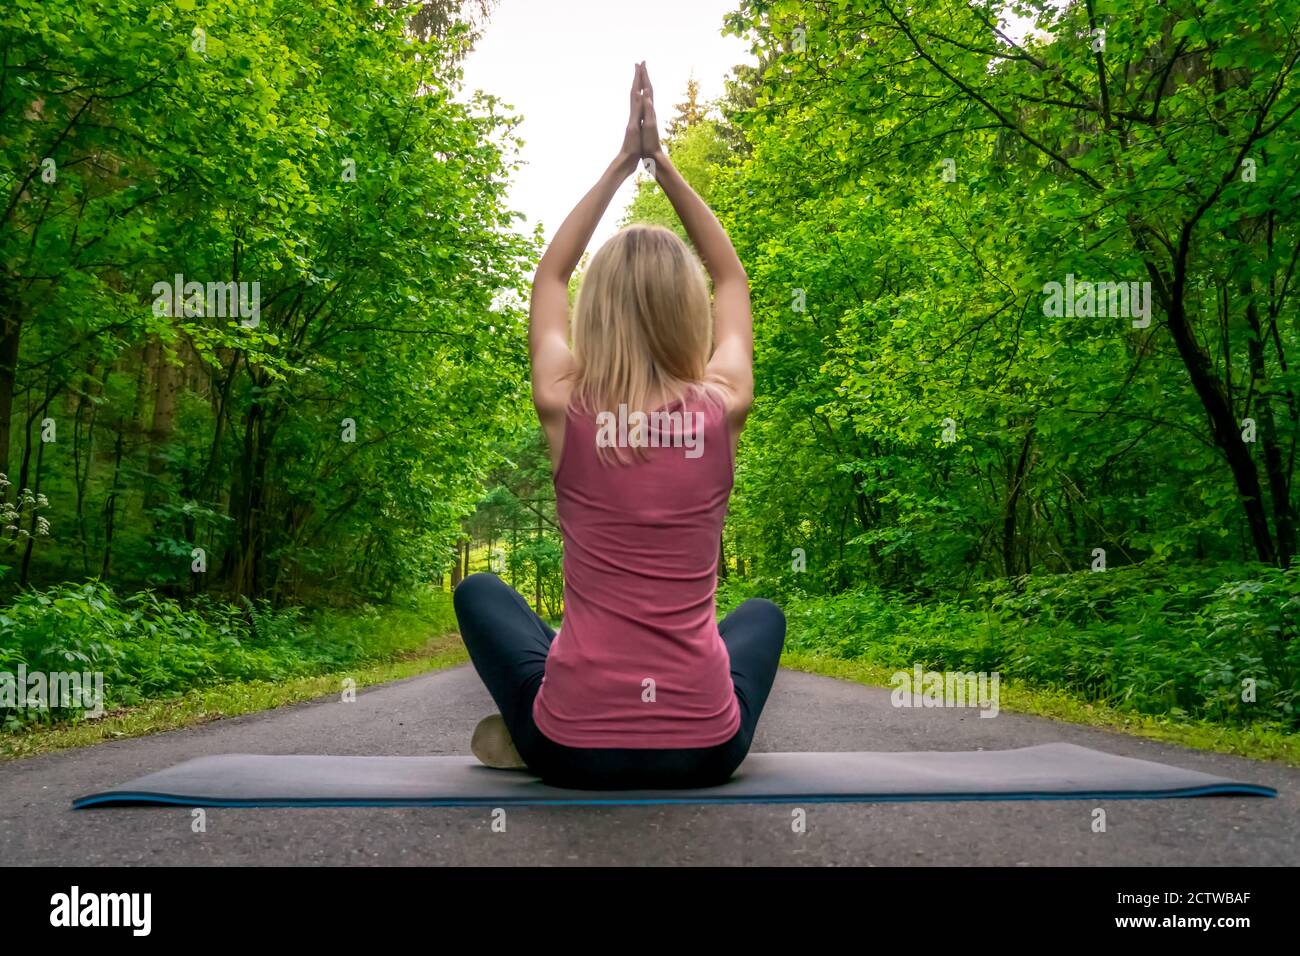 Young slim woman with blonde hair sitting on the yoga mat in split